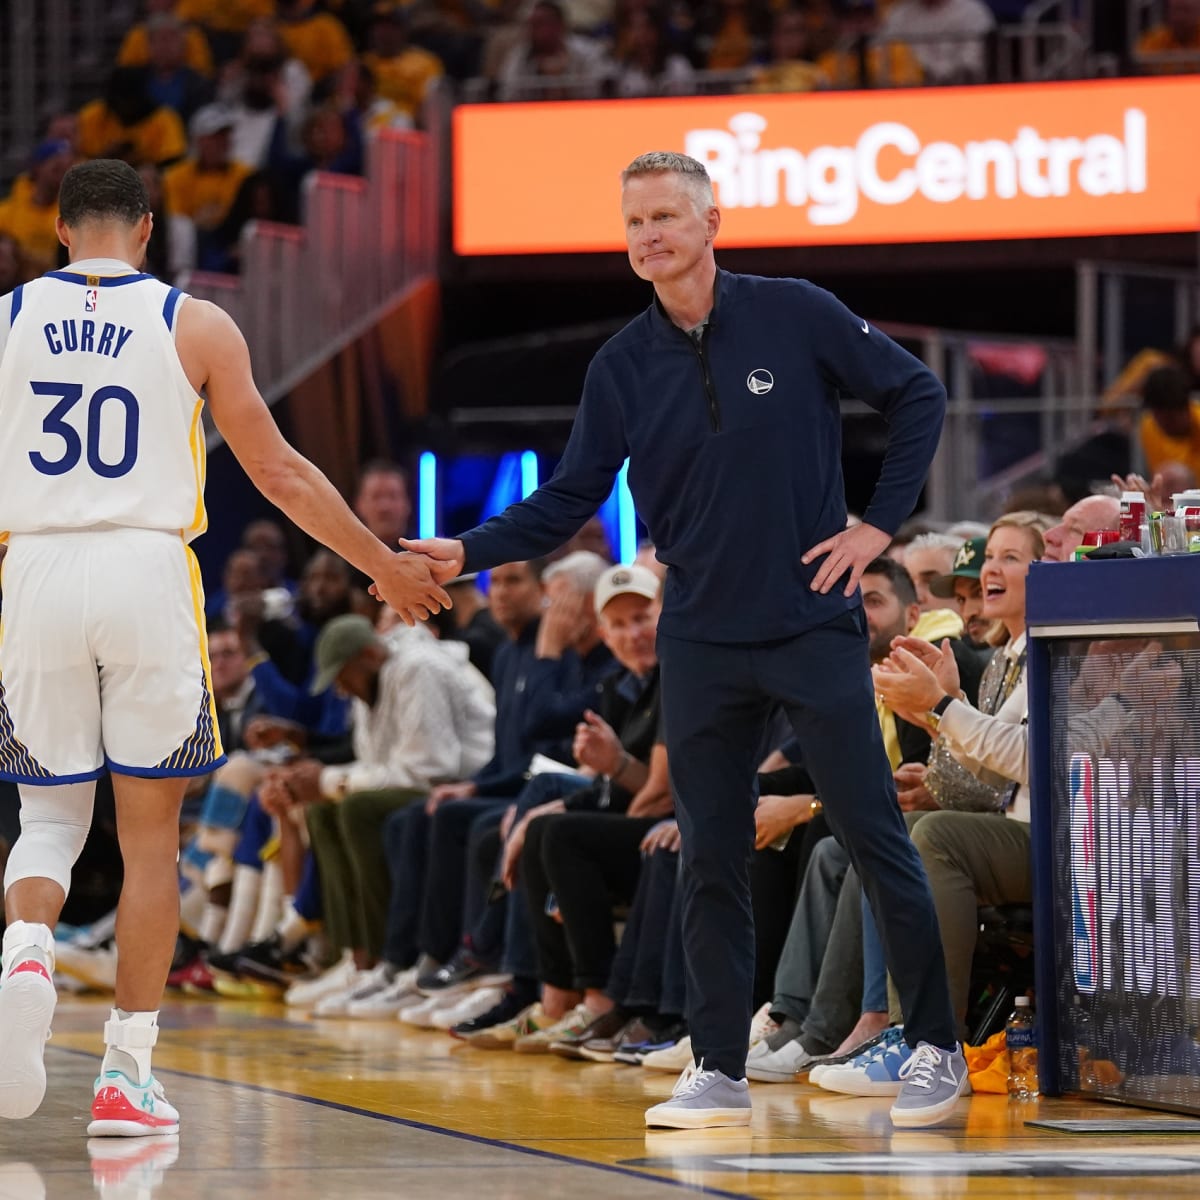 Padecky: Stephen Curry carries Warriors once again